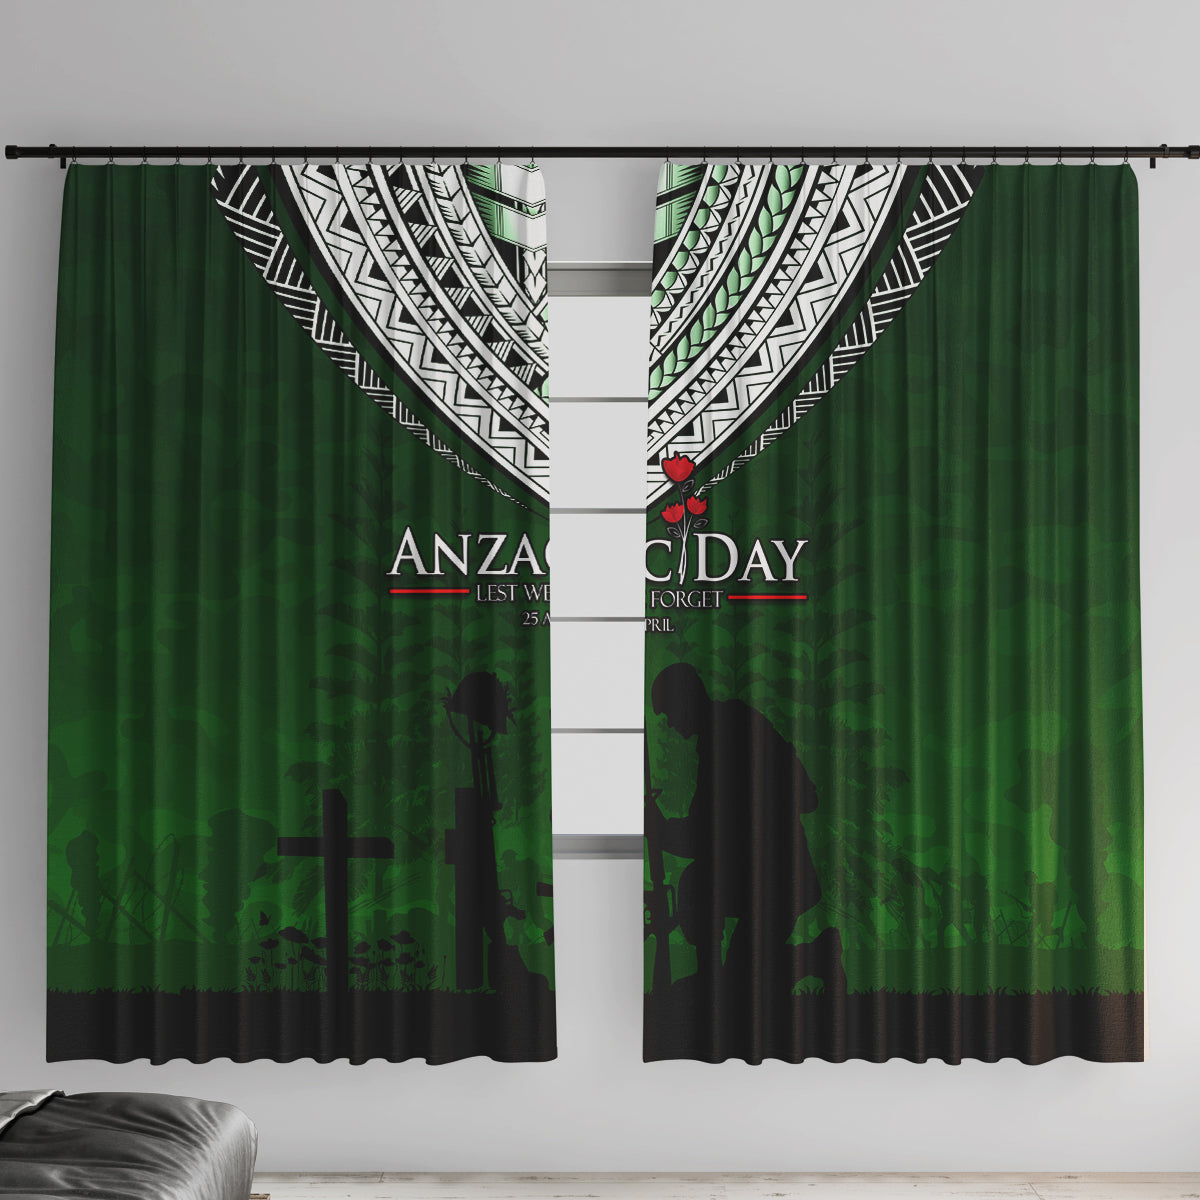 Norfolk Island ANZAC Day Window Curtain Soldier Lest We Forget Camouflage LT03 With Hooks Green - Polynesian Pride